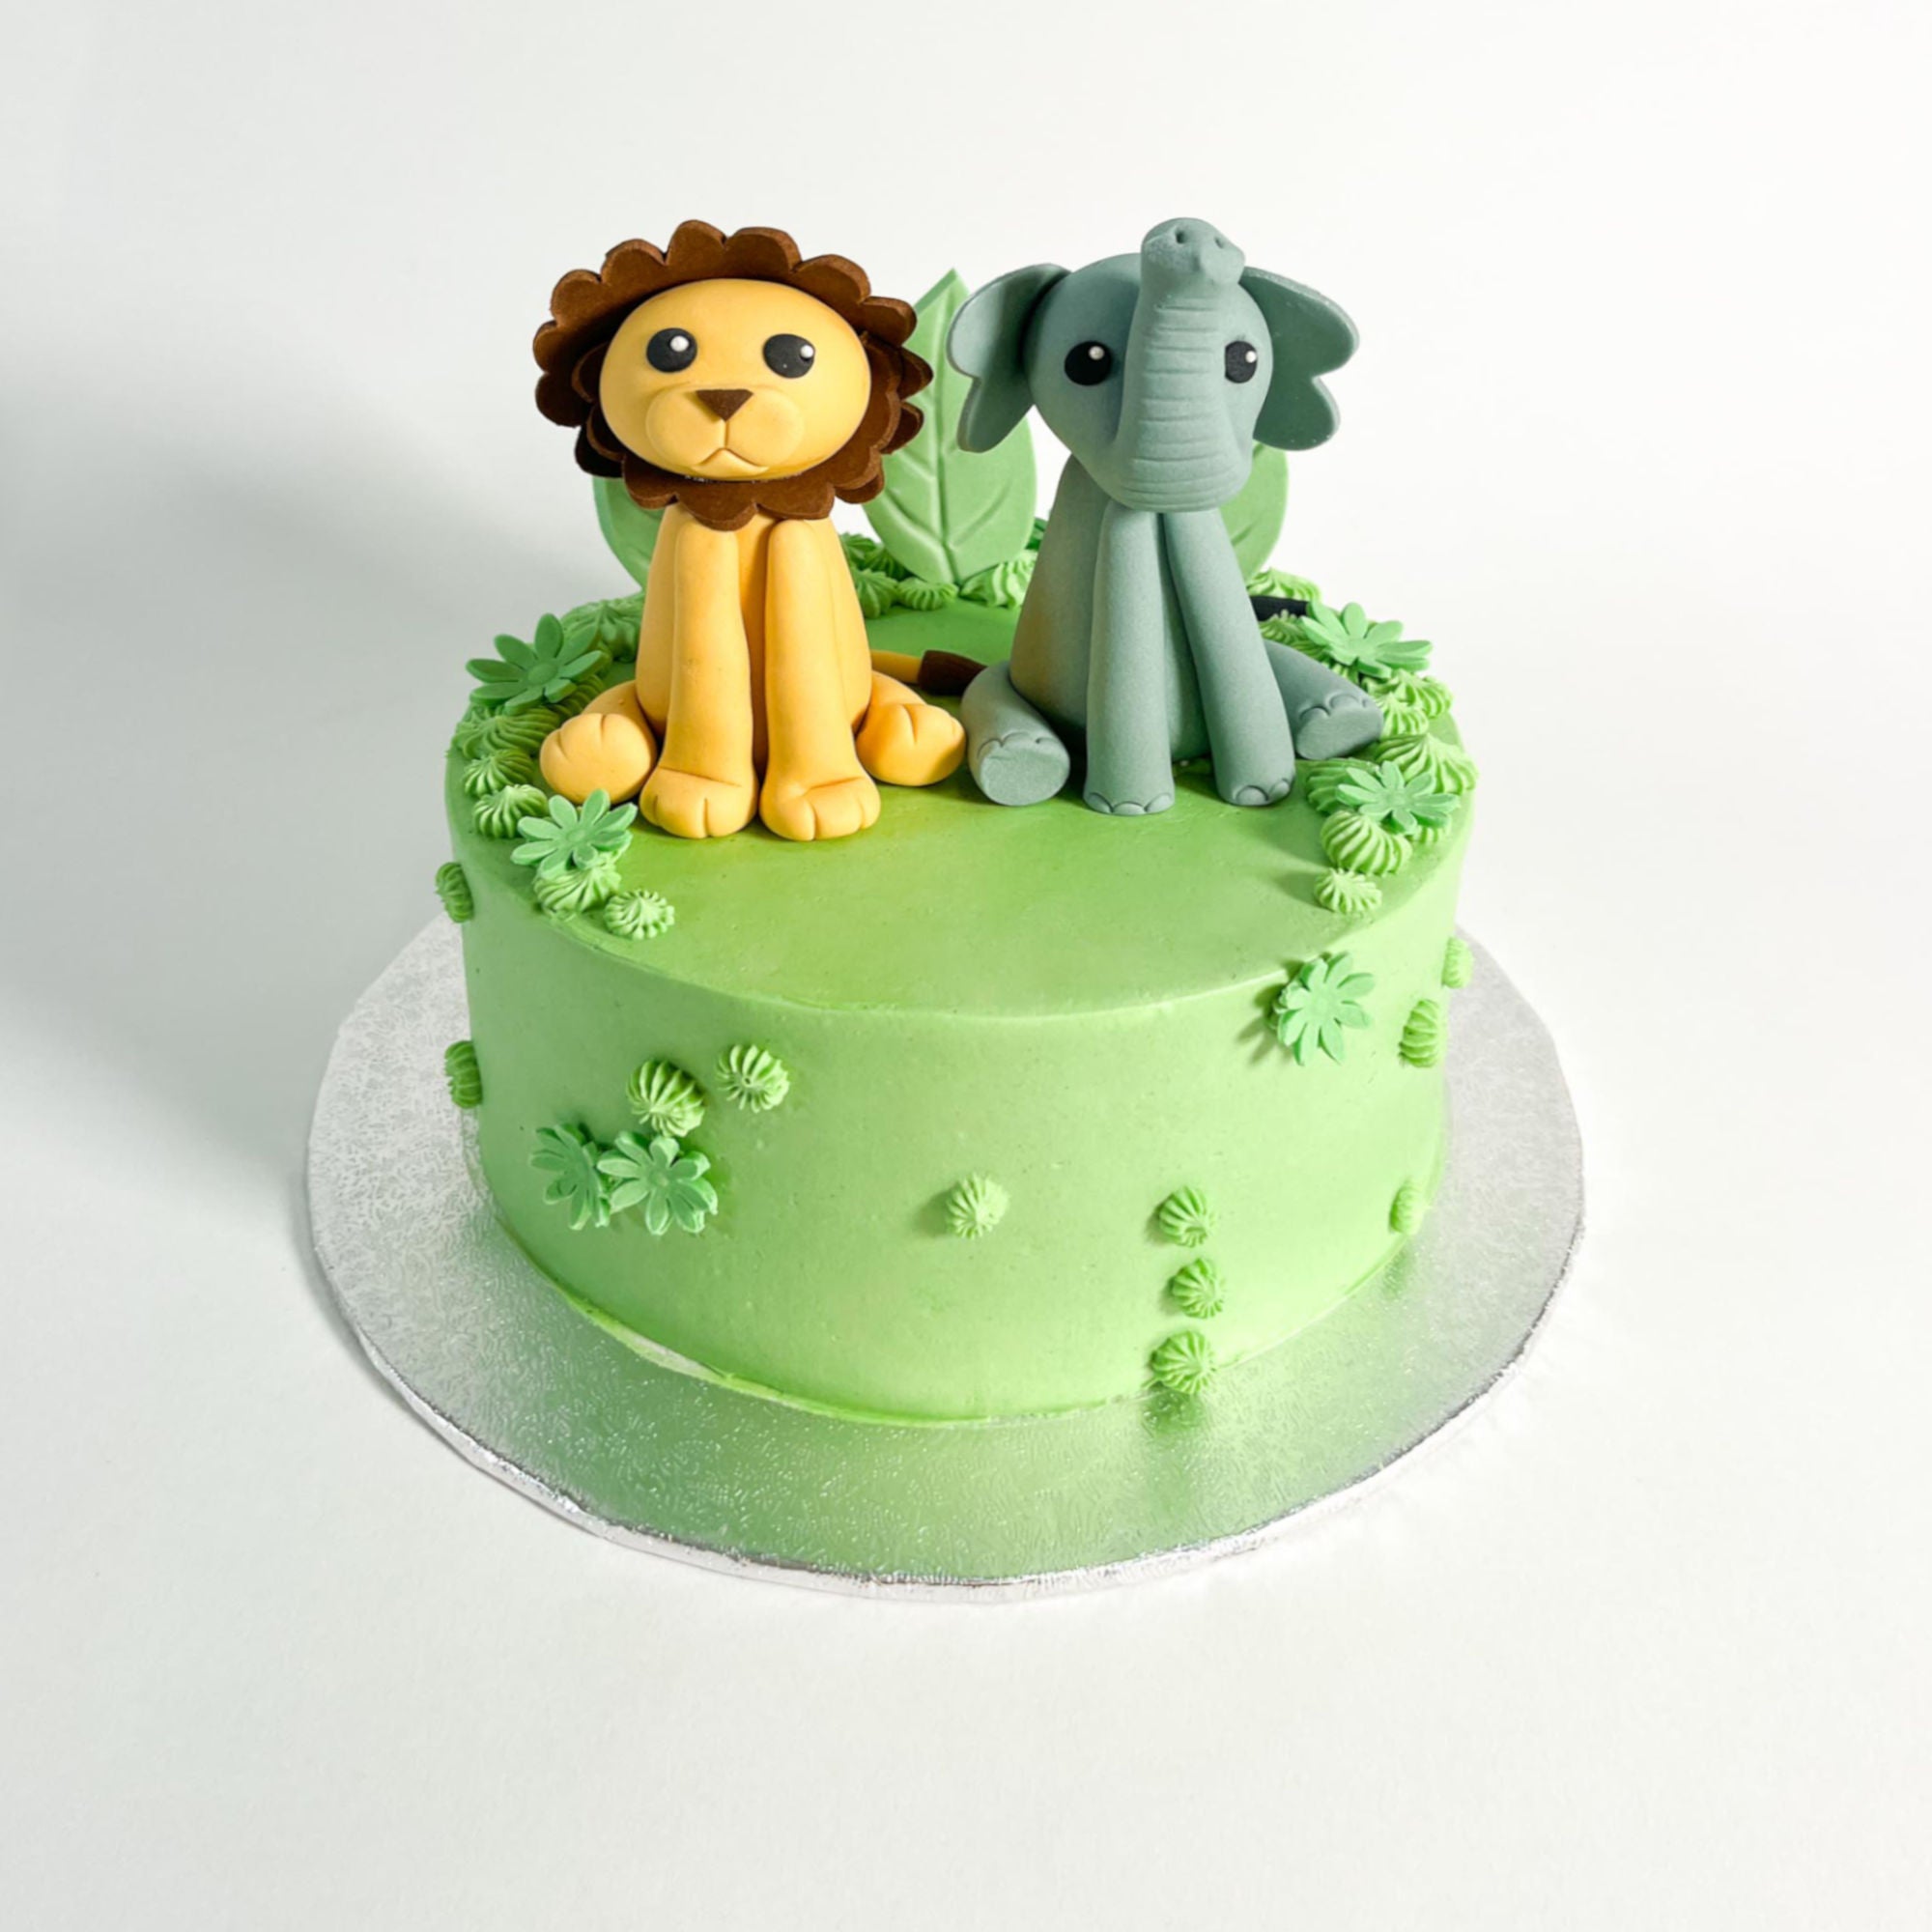 King of the jungle cake